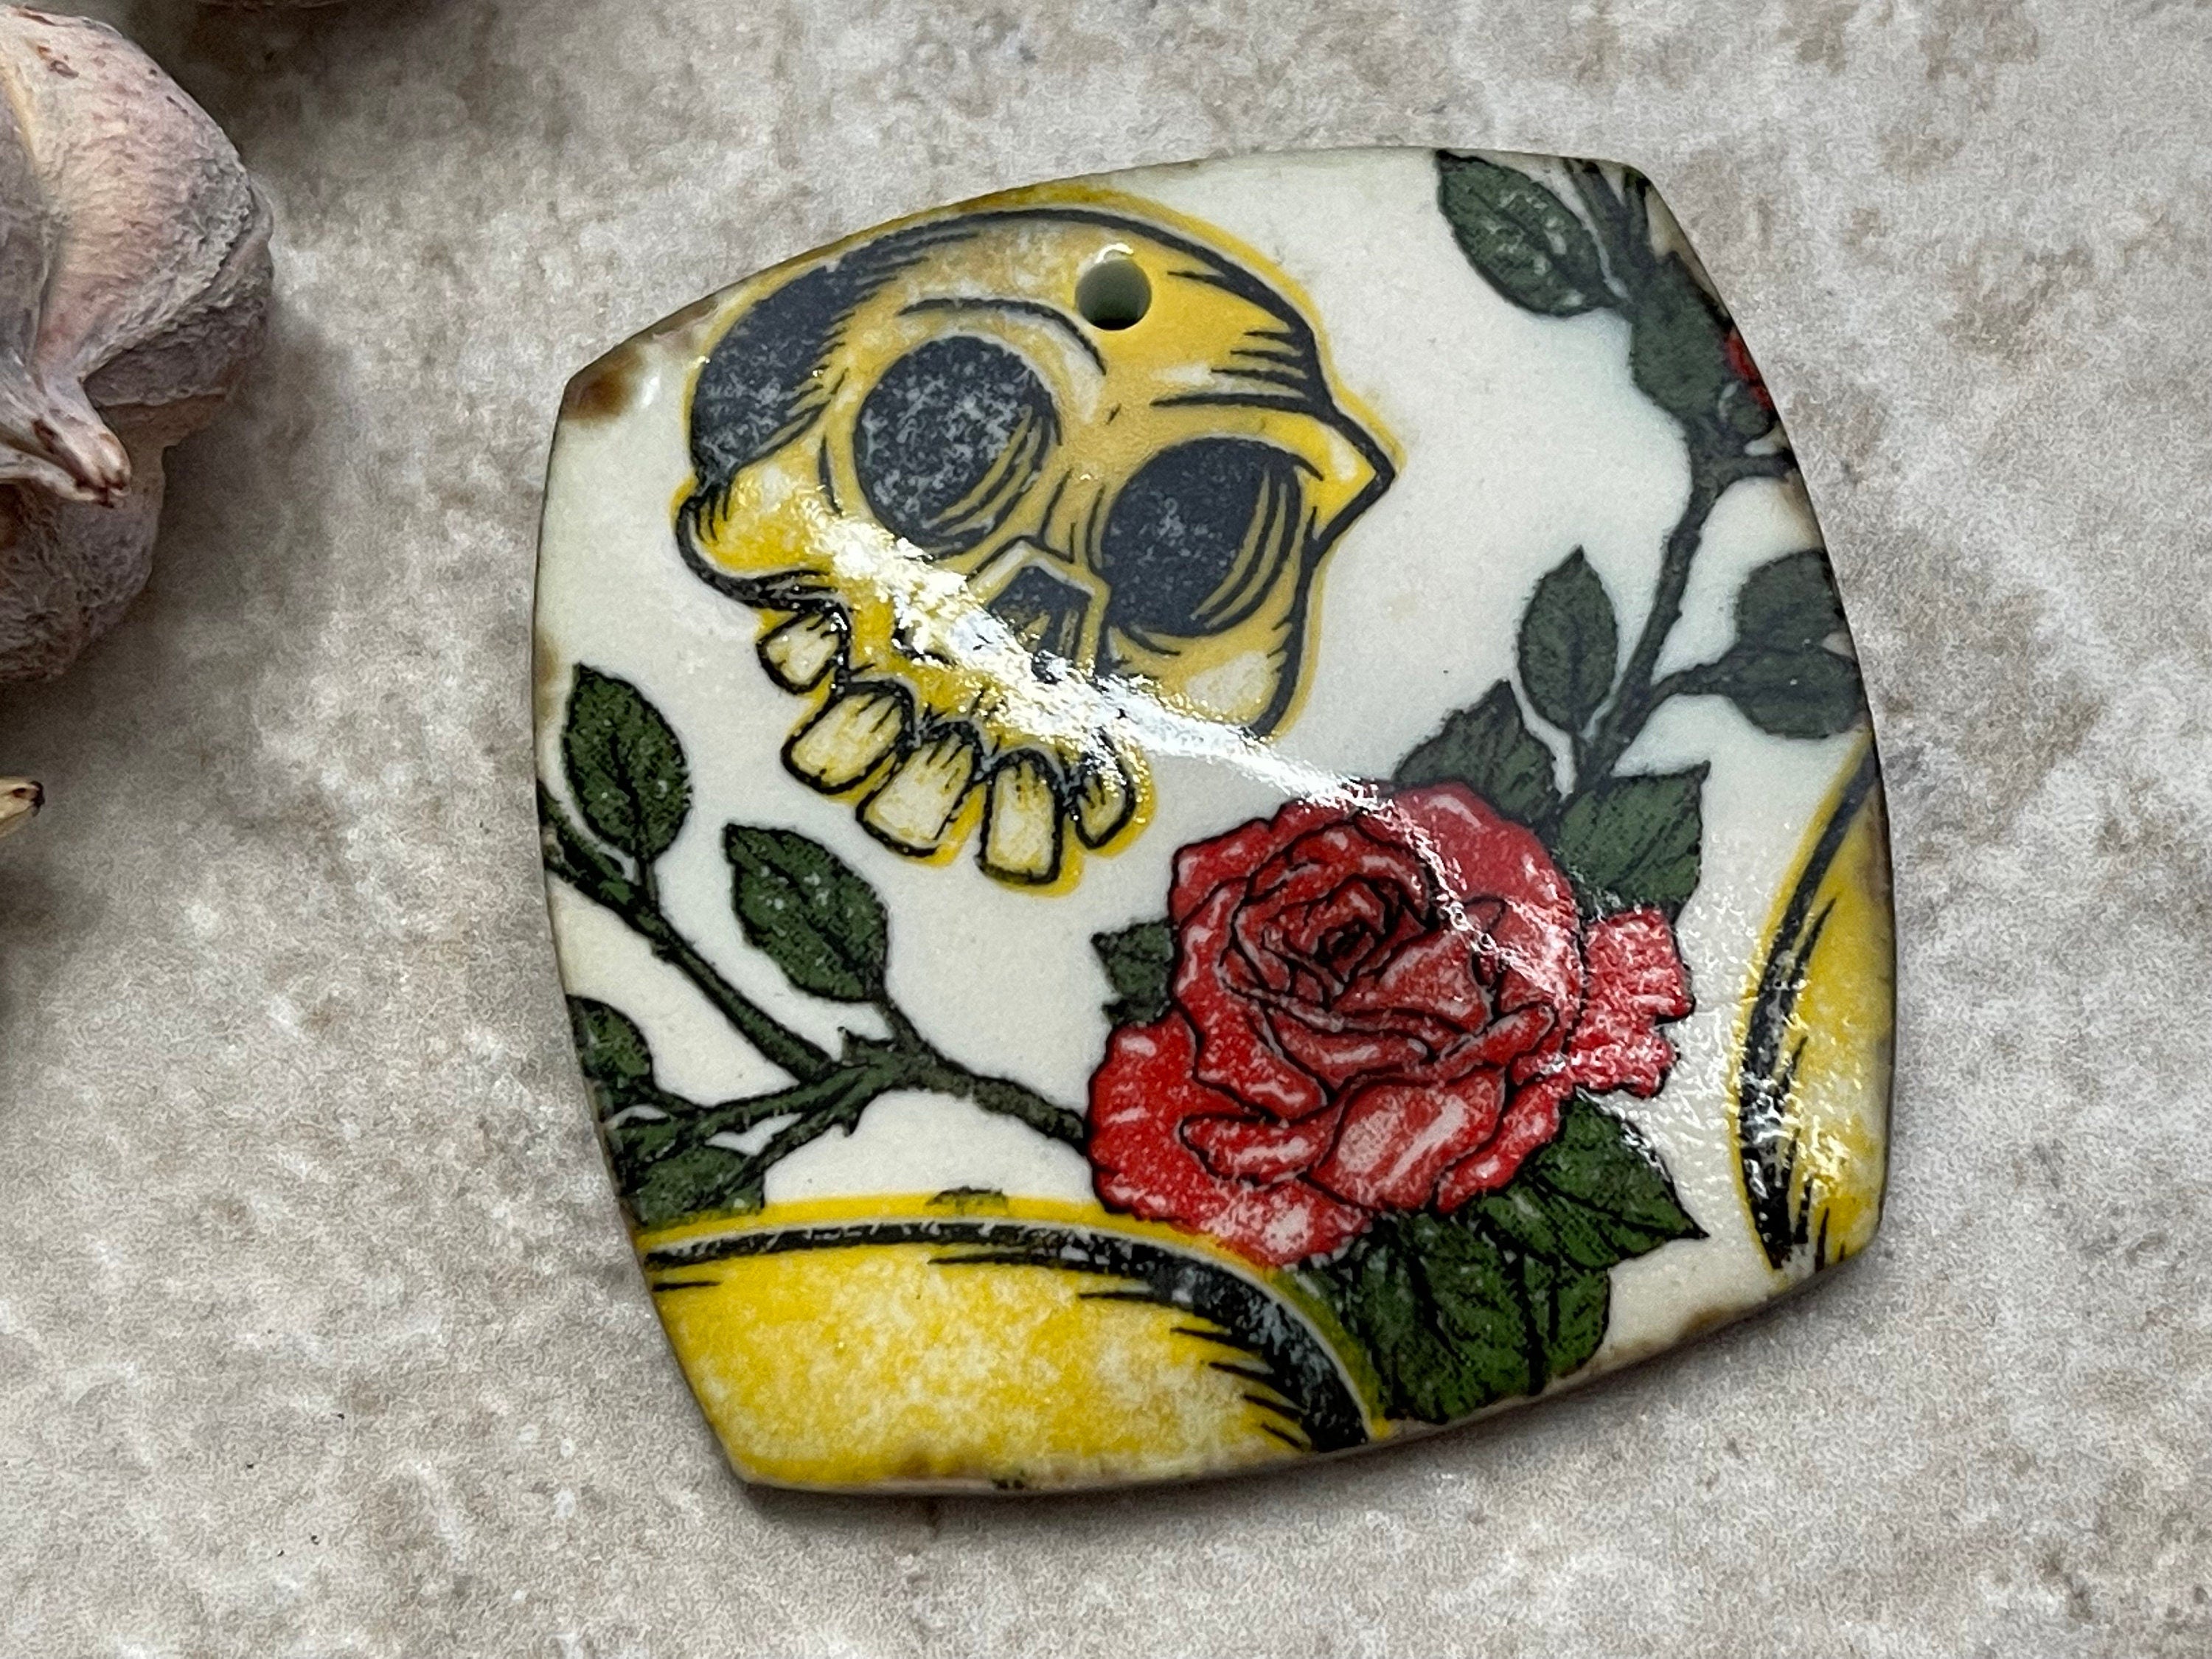 Skulls and Roses Pendant, Tattoo Style Pendant, Spooky Pendant, Gift for Her, Porcelain Pendant, Jewelry Making Components